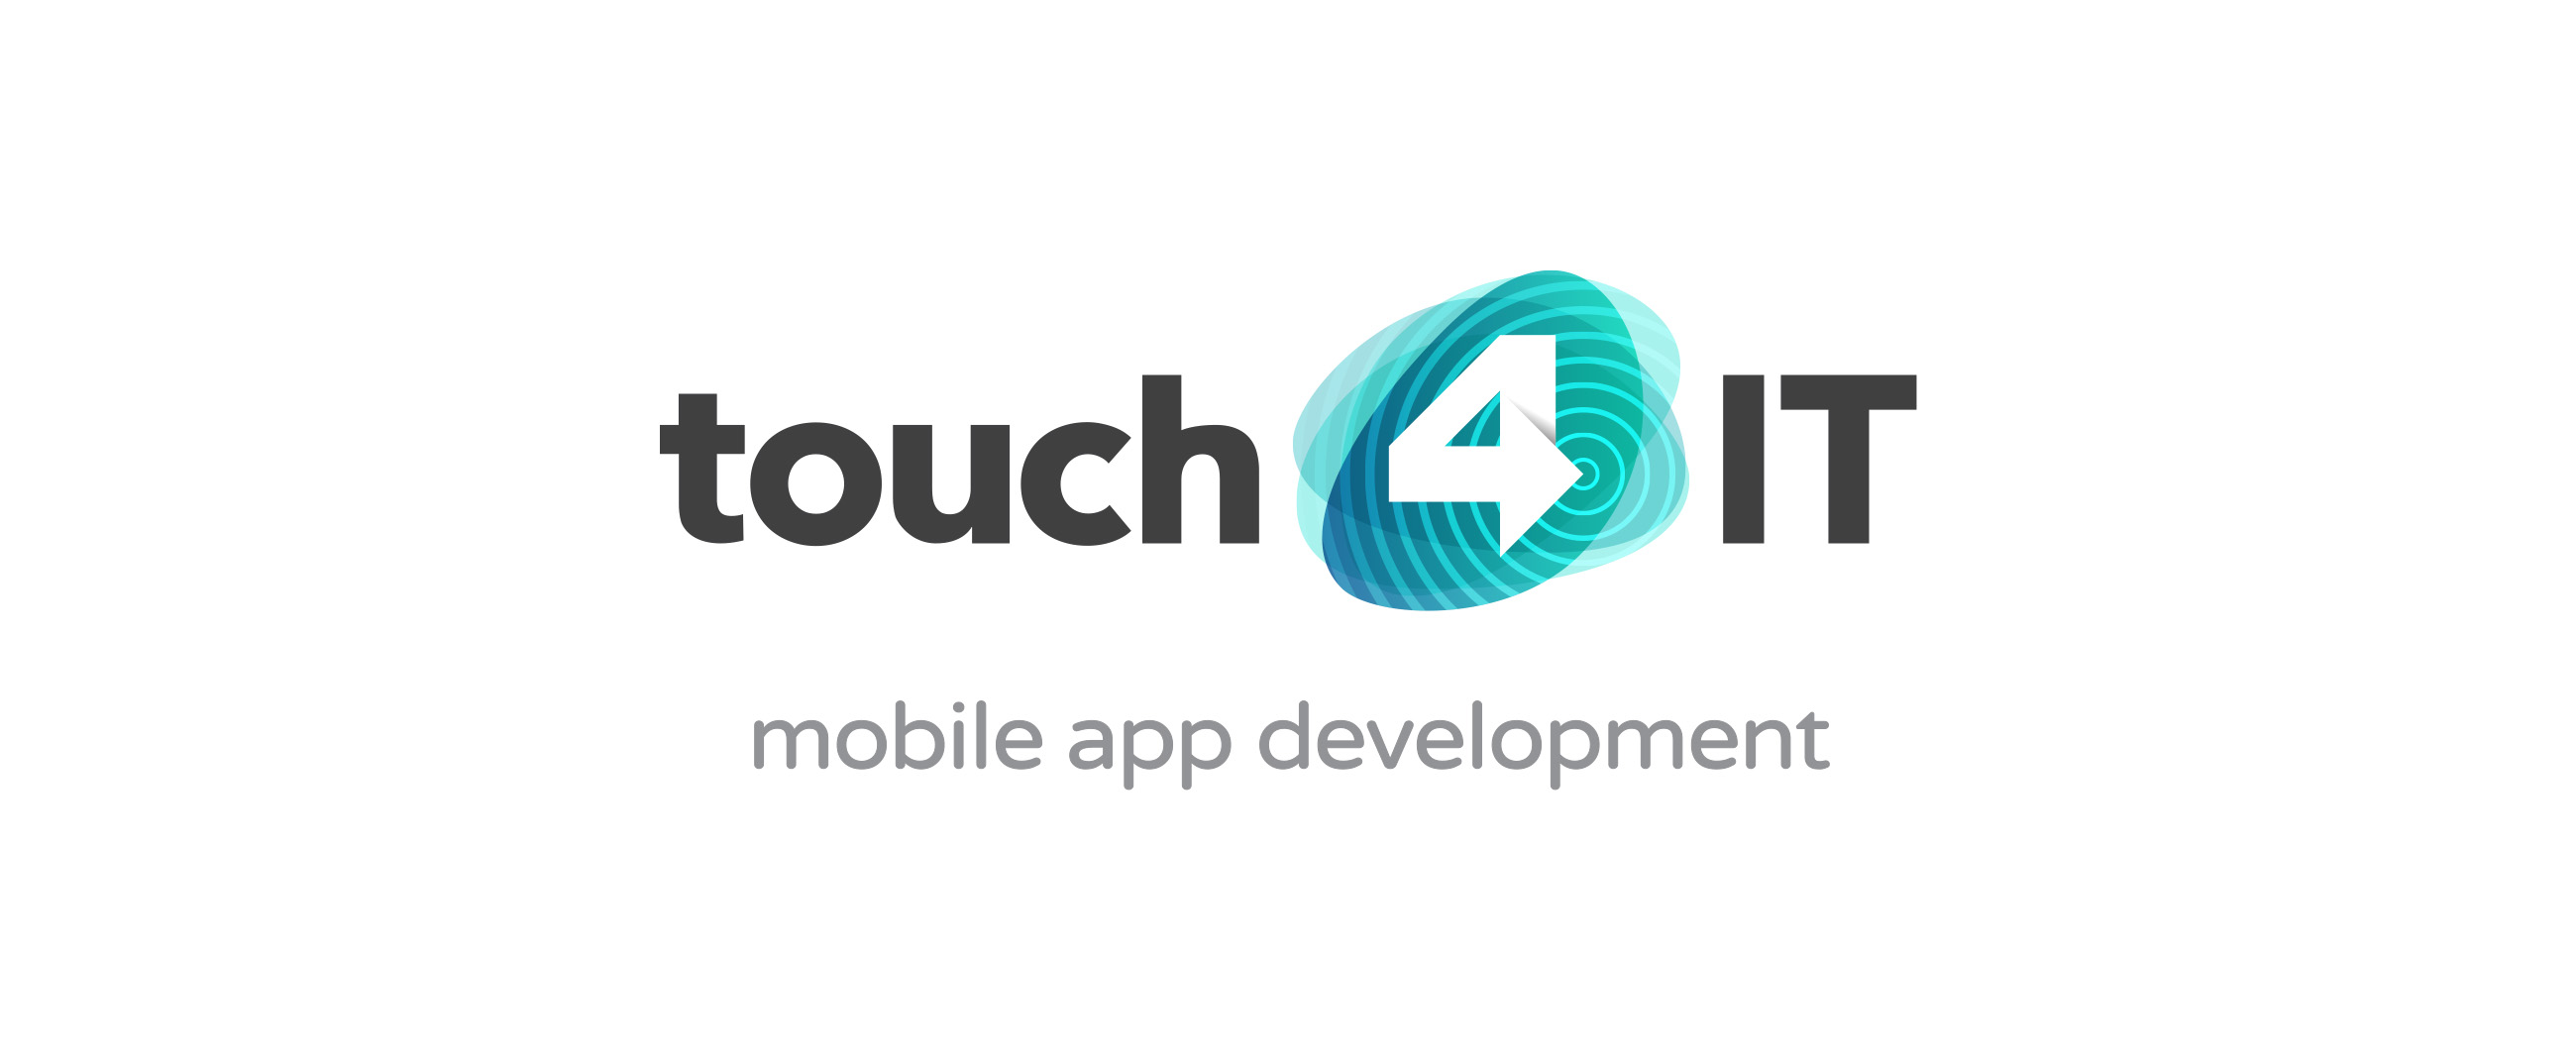 touch4it_logo_preview